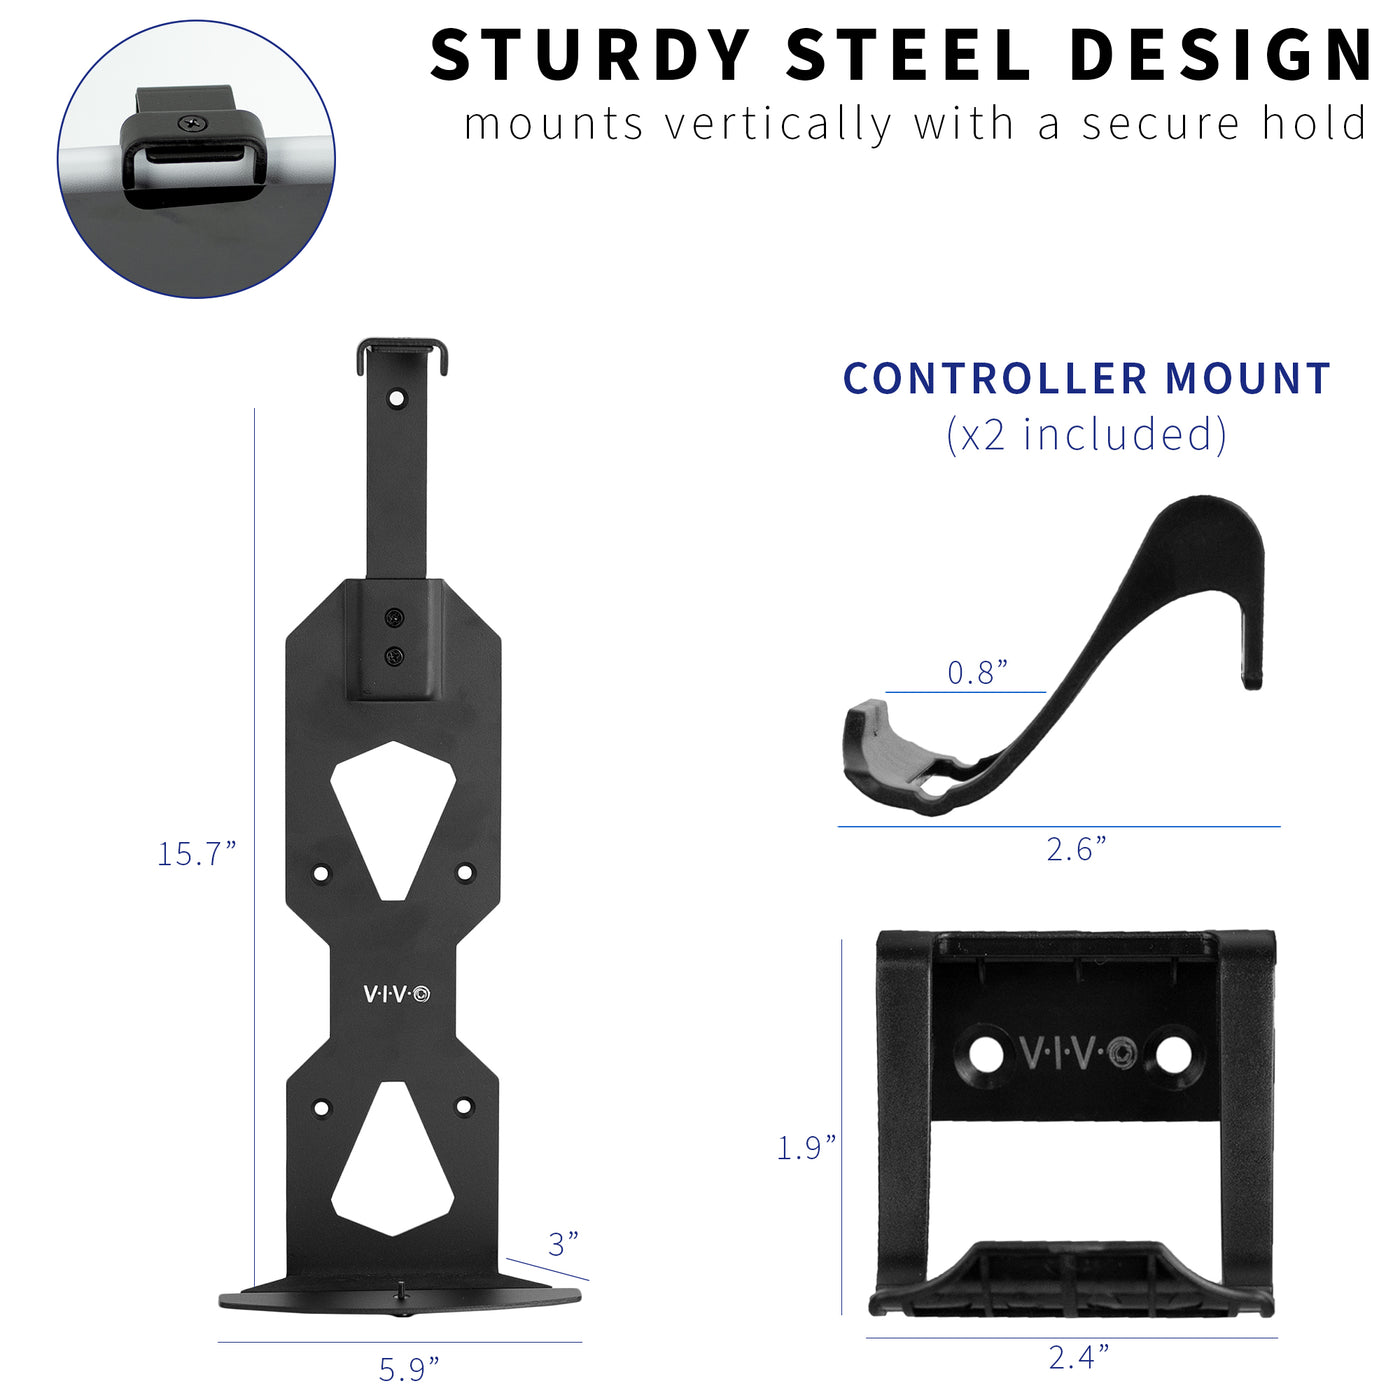 Study steel structure to securely hold gaming systems and two controllers.